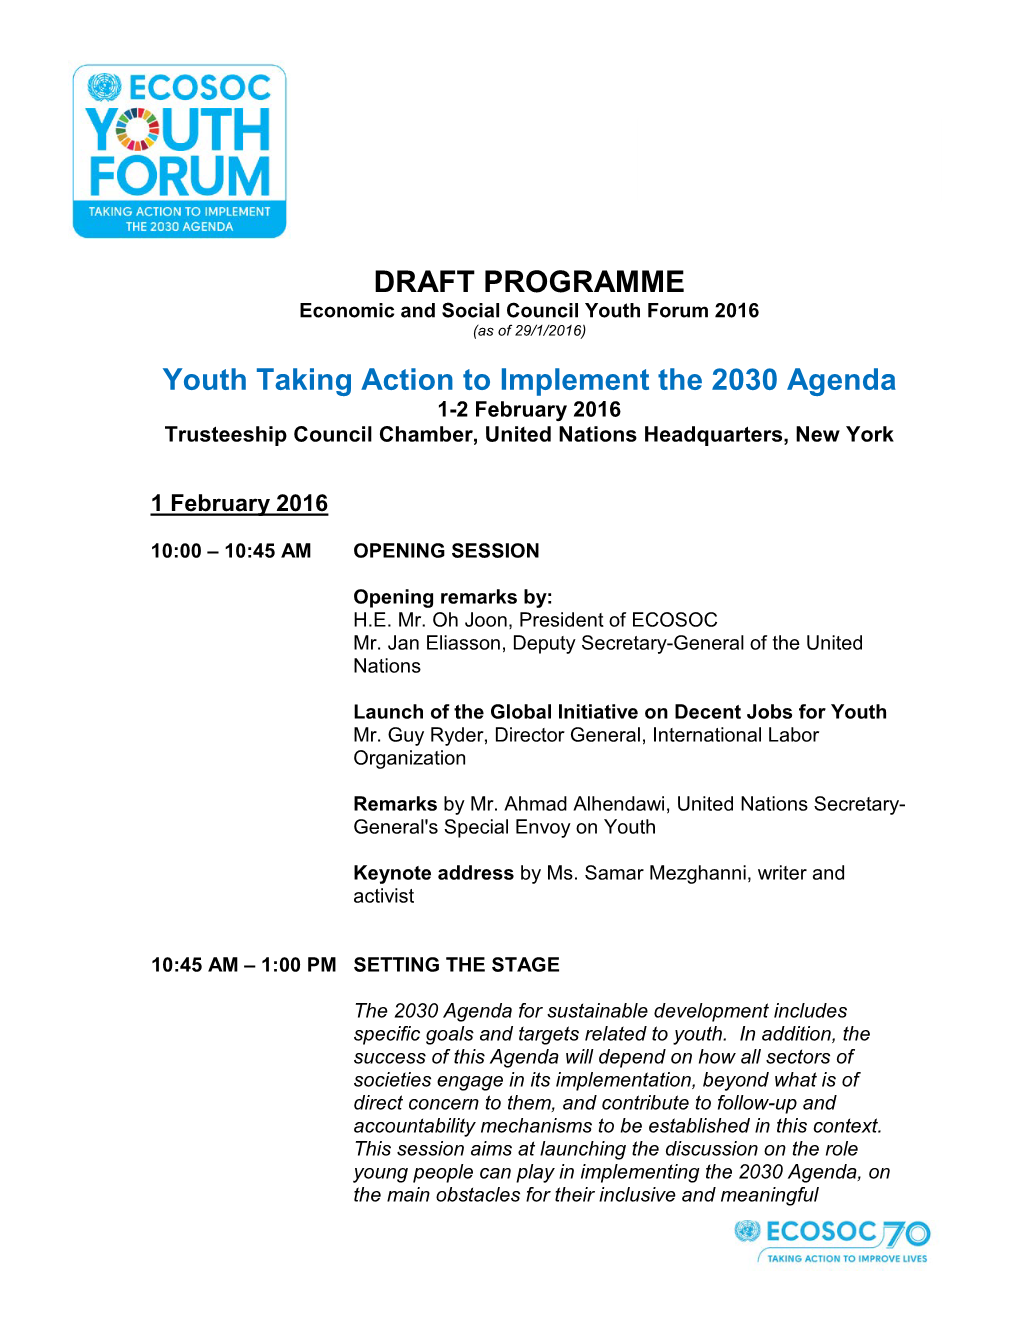 Programme of the ECOSOC Youth Forum 2016